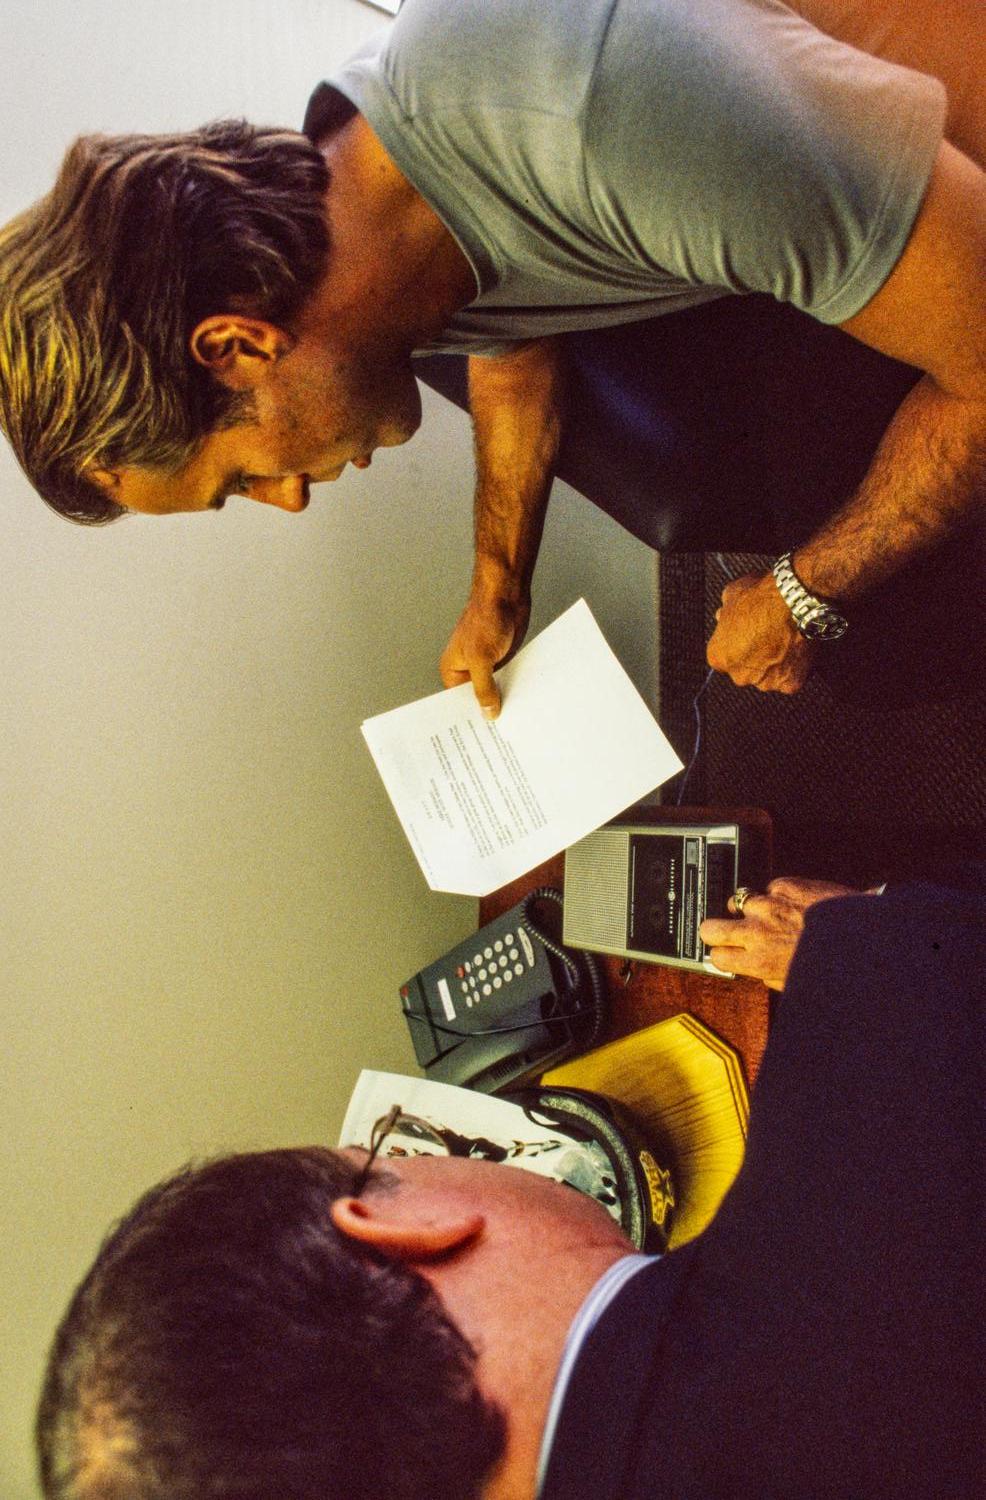 [Mike Modano reading a document to be recorded on tape]
                                                
                                                    [Sequence #]: 1 of 1
                                                